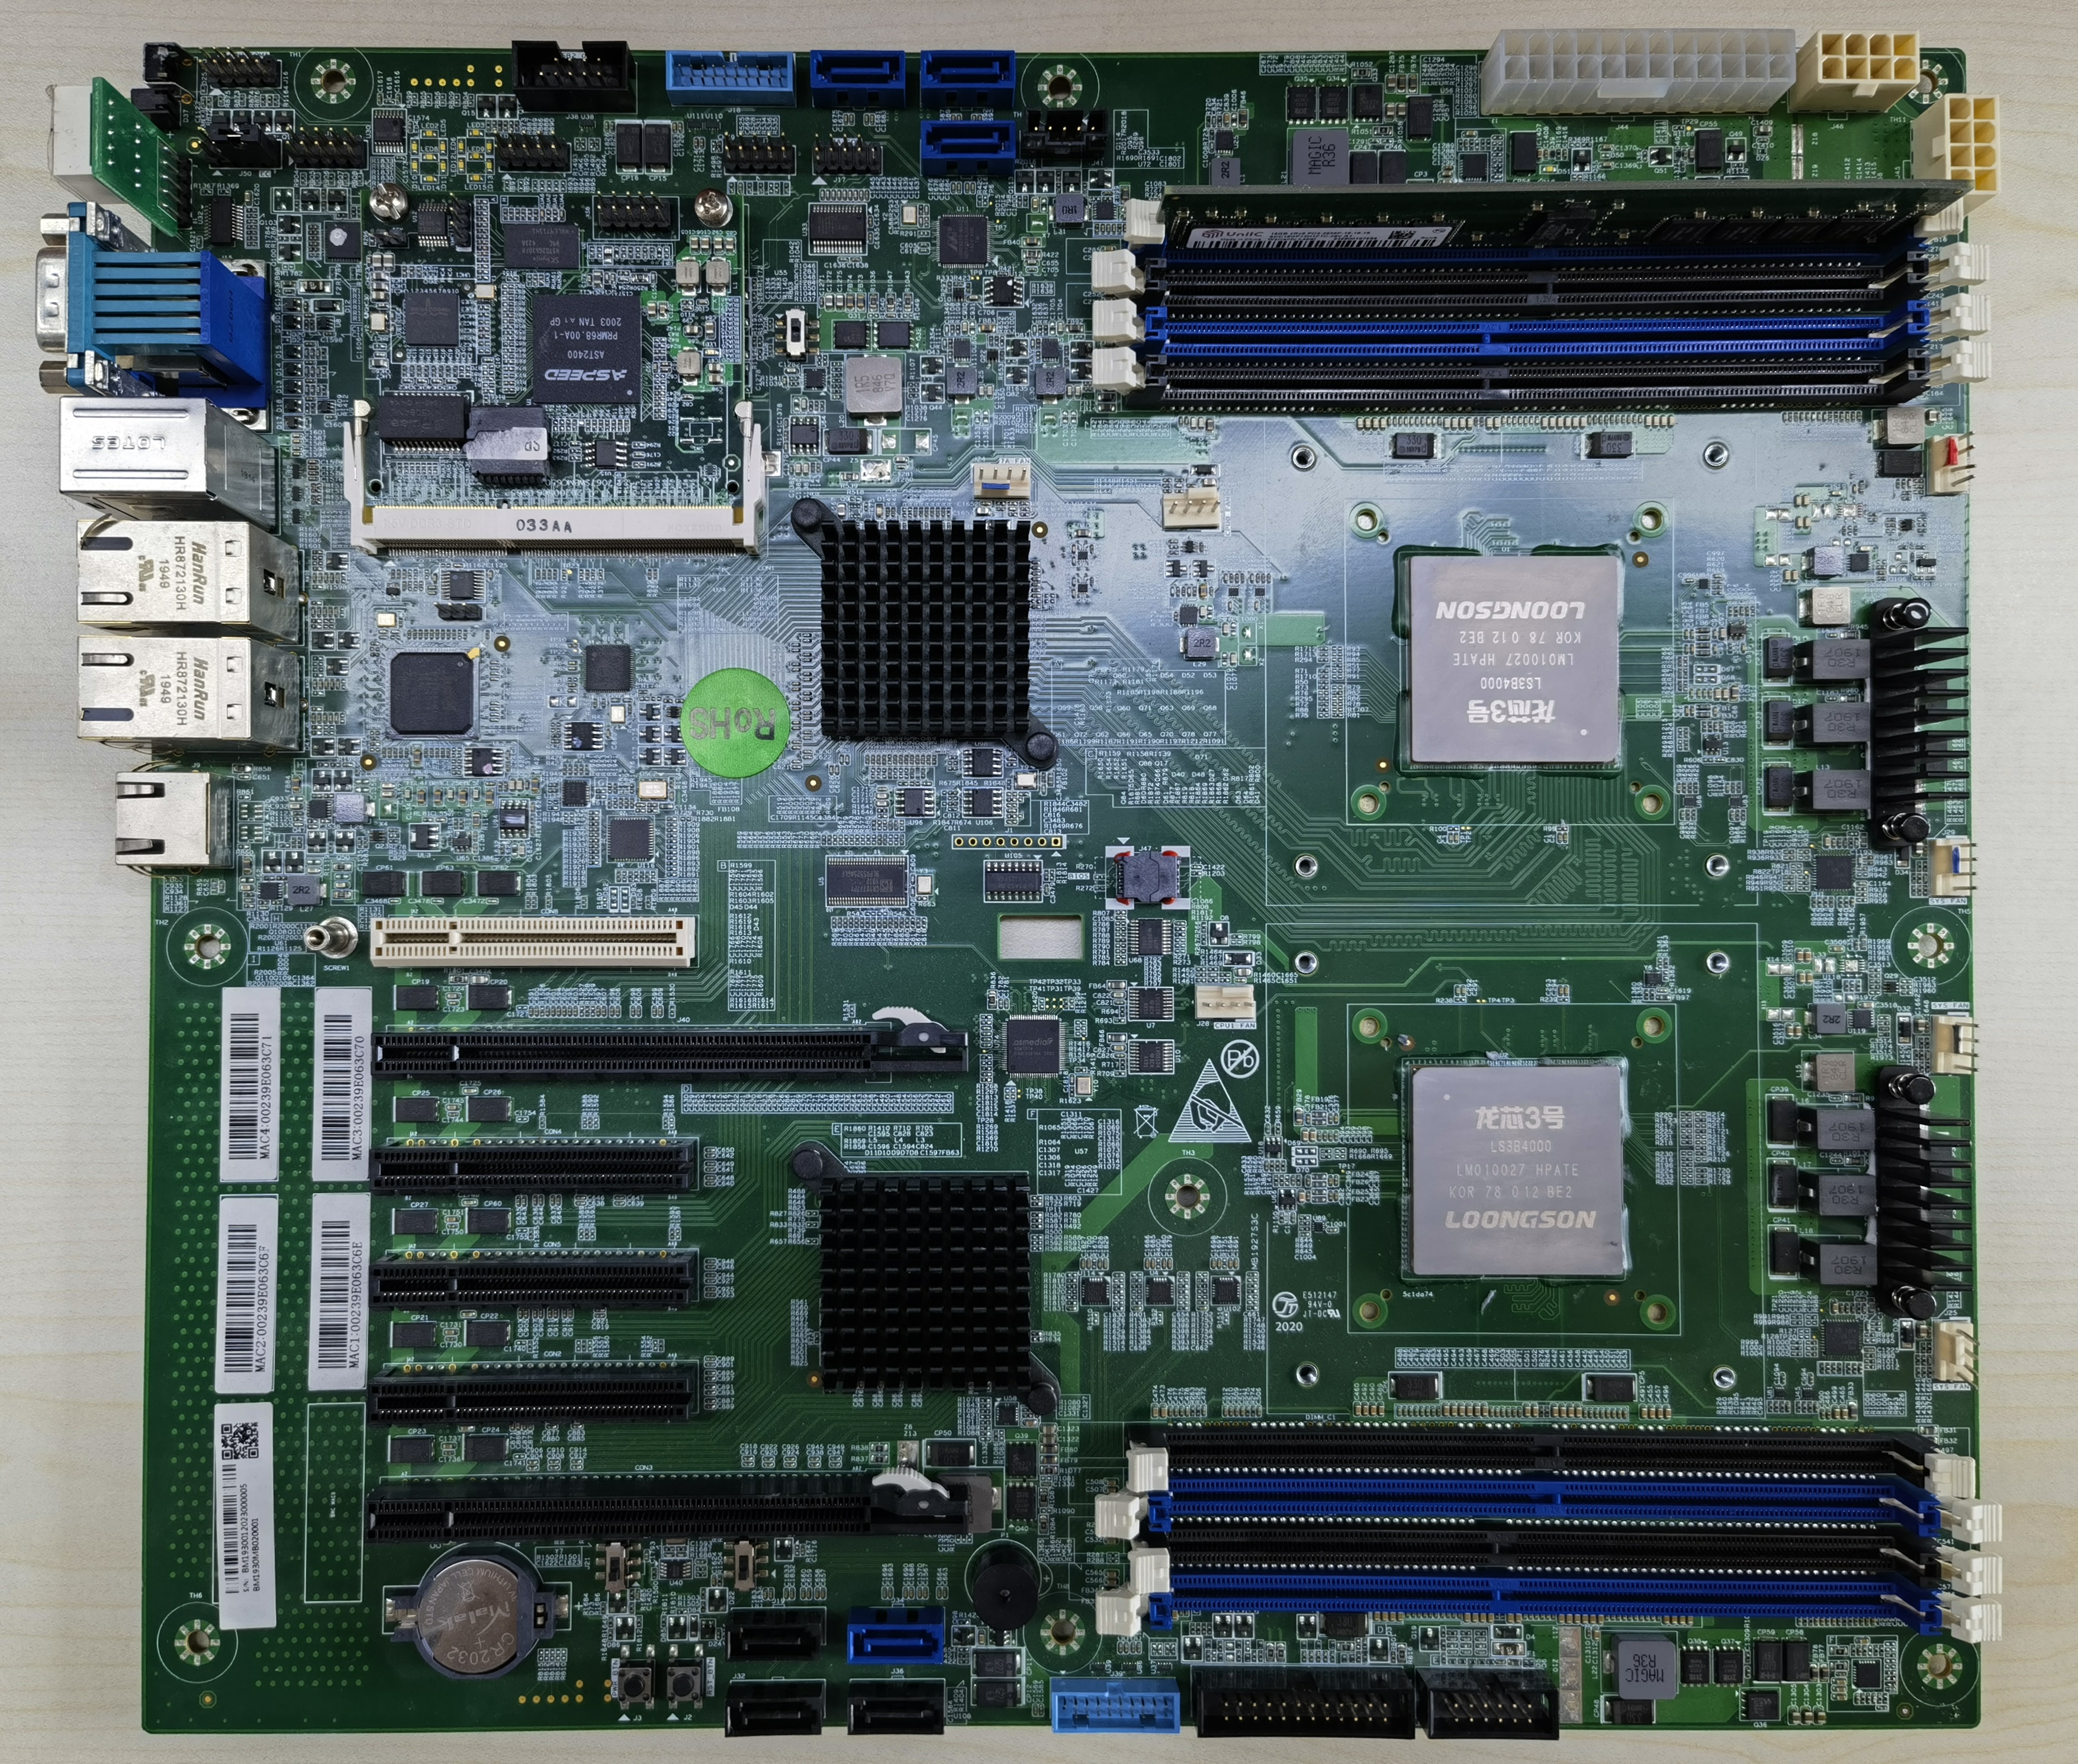 Our recently acquired dual 3B4000 motherboard.